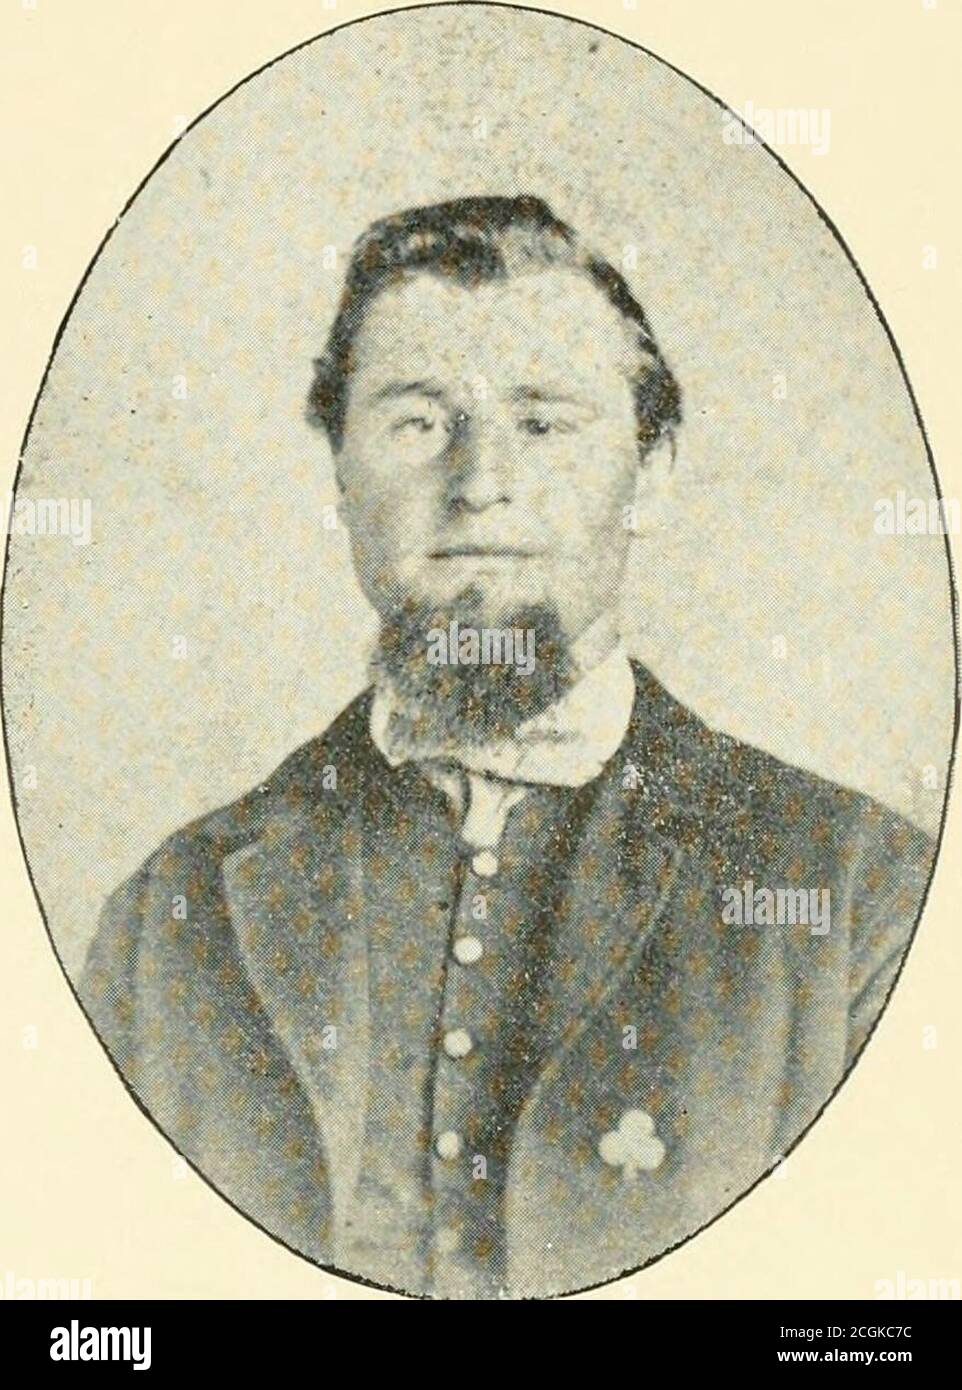 . History of the One hundred and sixth regiment, Pennsylvania volunteers, 2d brigade, 2d division, 2d corps, 1861-1865 . Lieutenant James C Biggs. Sepf. 17, 1861. Oct. 19, 1864. As Sergeant, Company H. Promoted to Sergeant-Major, May i, 1862. Promoted to First Lieutenant. Co. F., Sept. 19, iS Discharged, Oct. 19, 1S64. Sergeant Richard F. Whitmoyer. Sept. 12, i86r. June 30, 1865 Re-enlisted March 30, 1864. Veteran. As Corporal. Promoted to Sergeant, March 20, 1864. Promoted to First Sergeant, June 13, 1865. Captured at Petersburg, Va., June 22, 1864. Prisoner from June 22, 1864 to Nov. 26, 186 Stock Photo